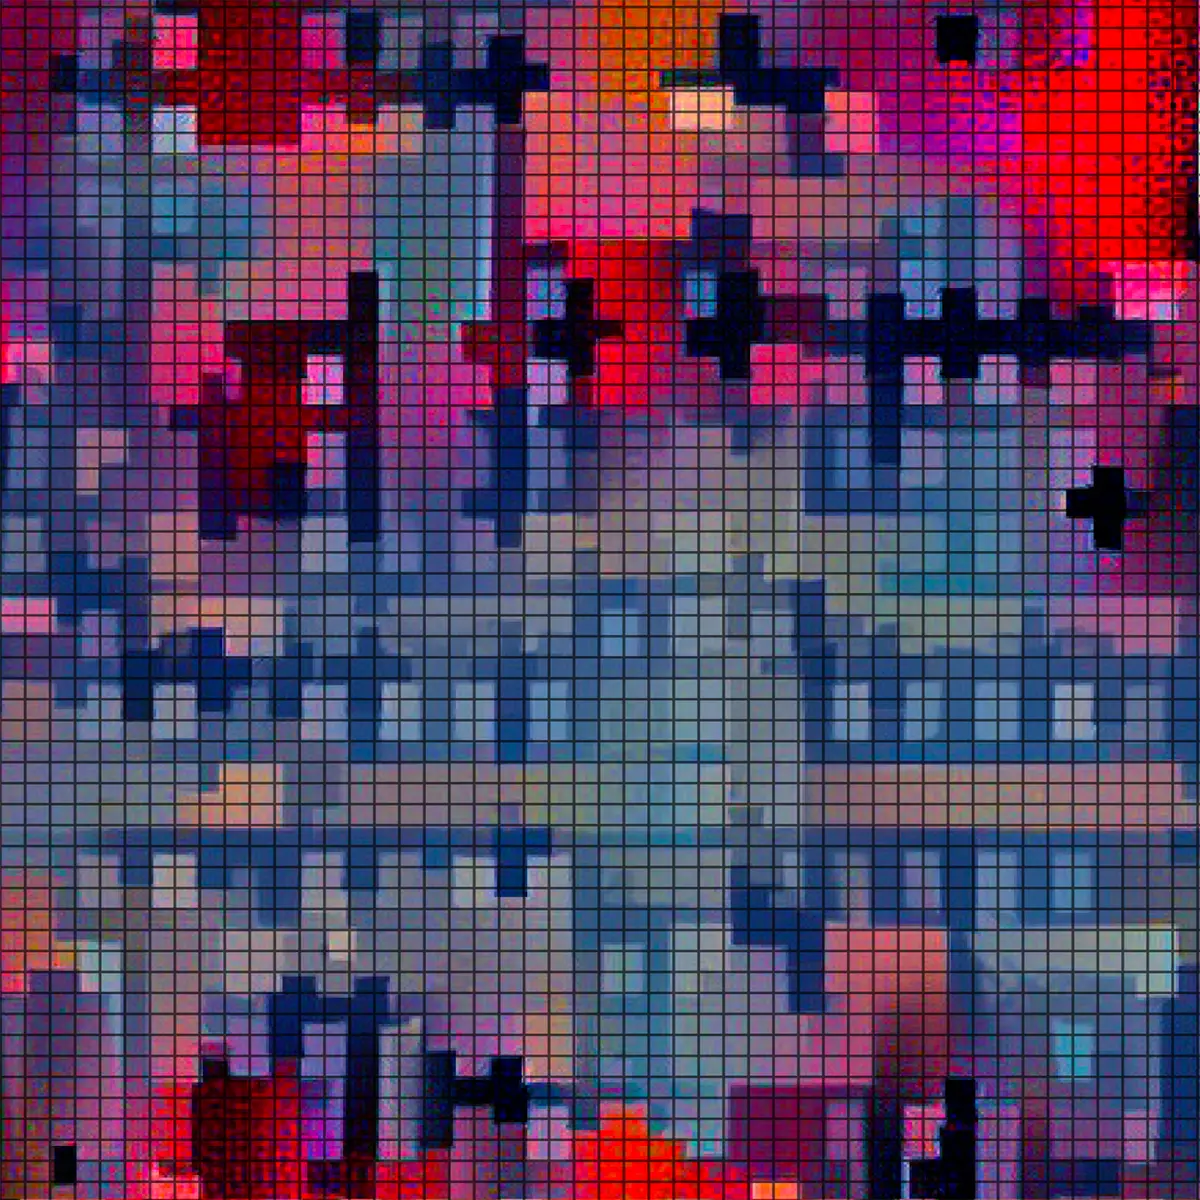 An intricate grid artwork displaying a complex pattern of vibrant pink and cool blue shades.